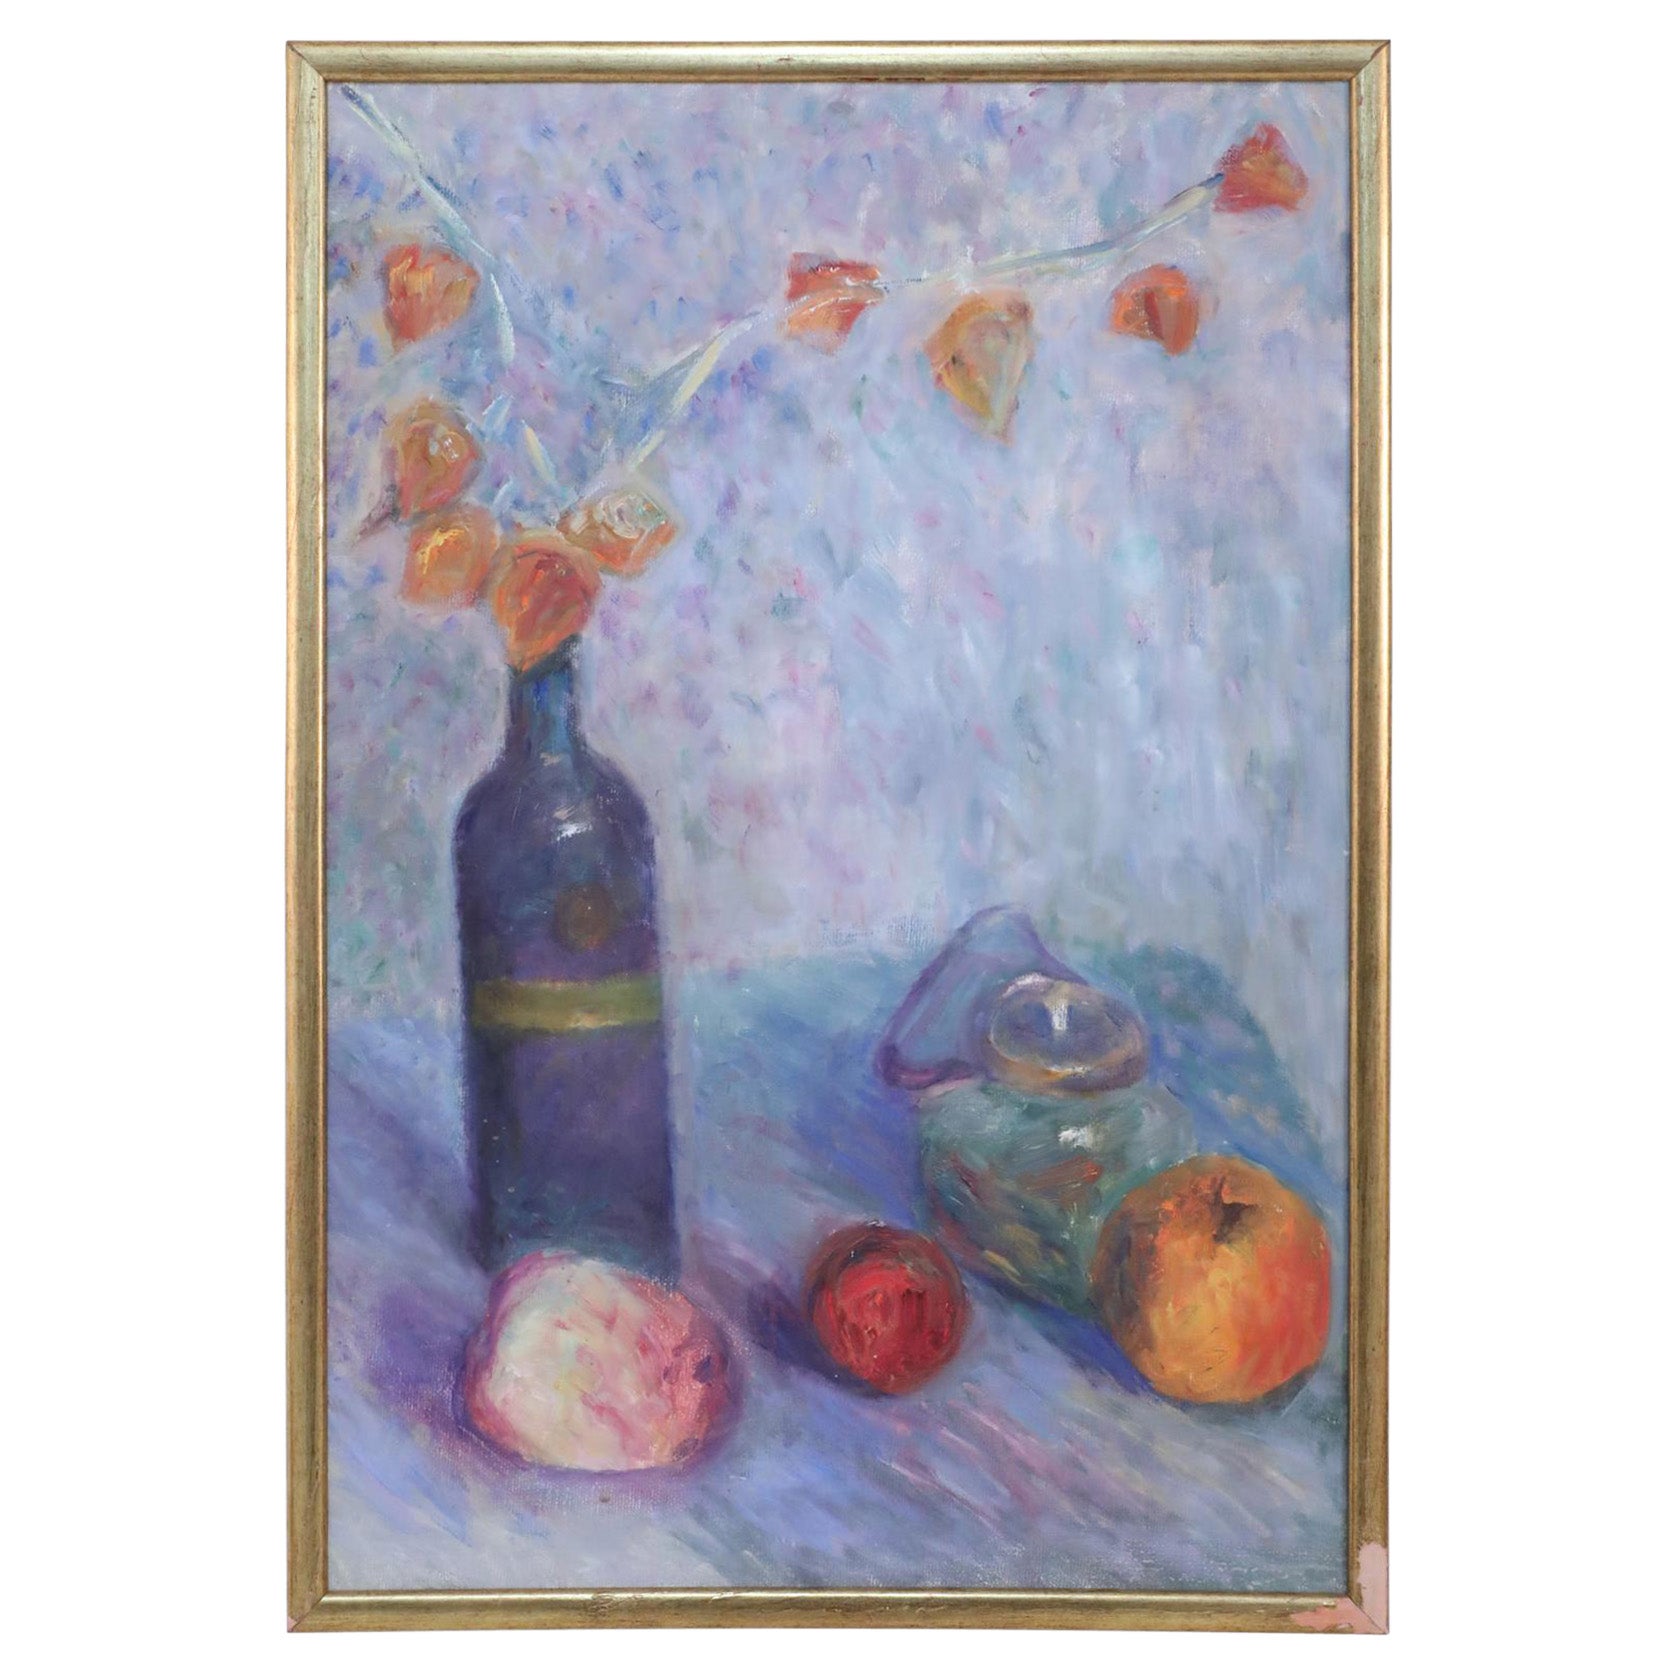 Framed Oil Still Life Painting of a Wine Bottle With Flowers and Fruit